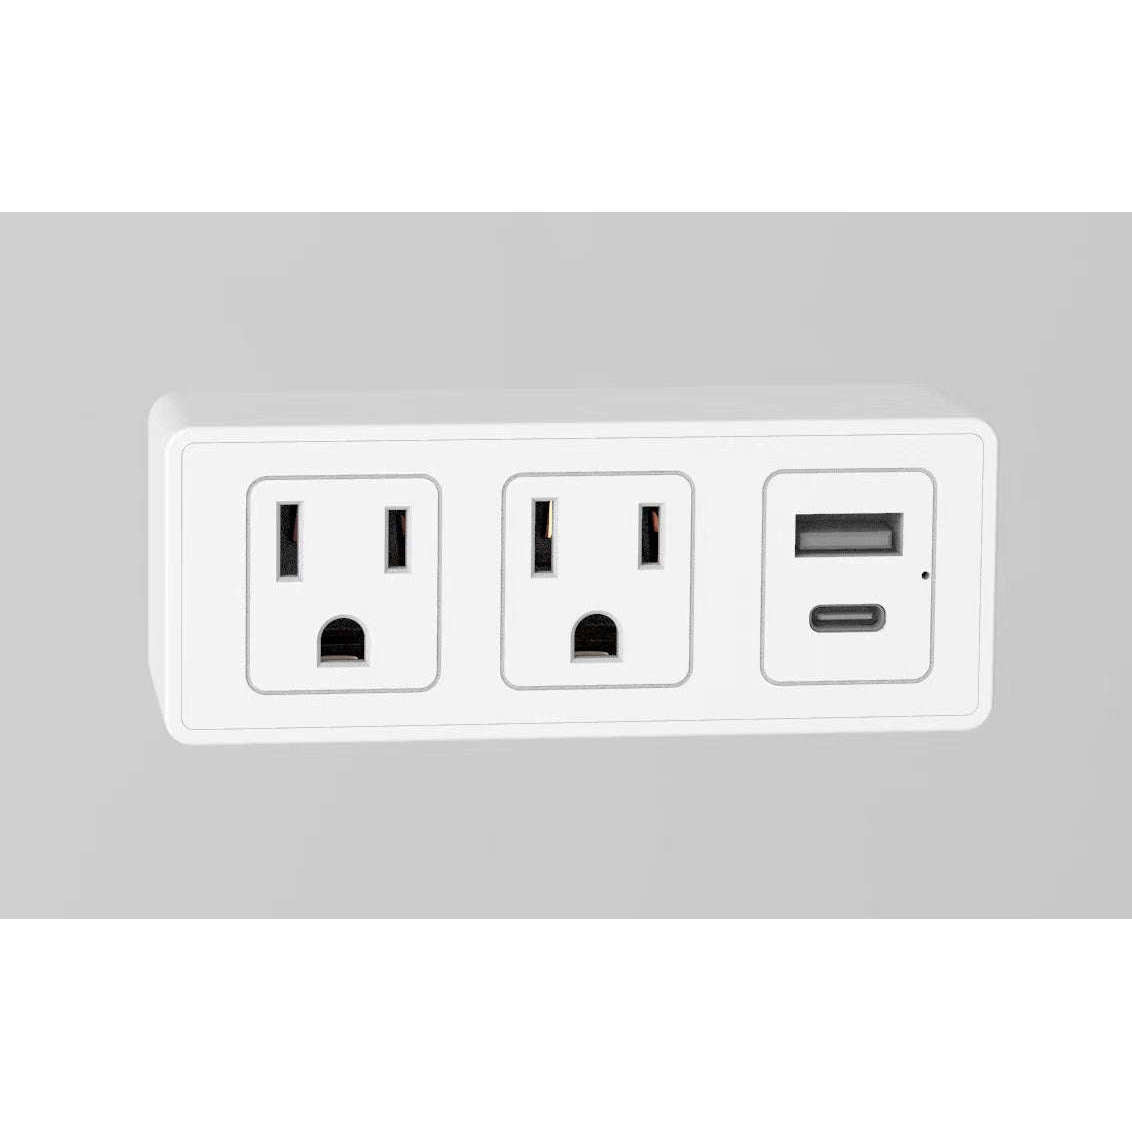 LAX Surge Protector 300j 2 Outlets and 2 USB Ports